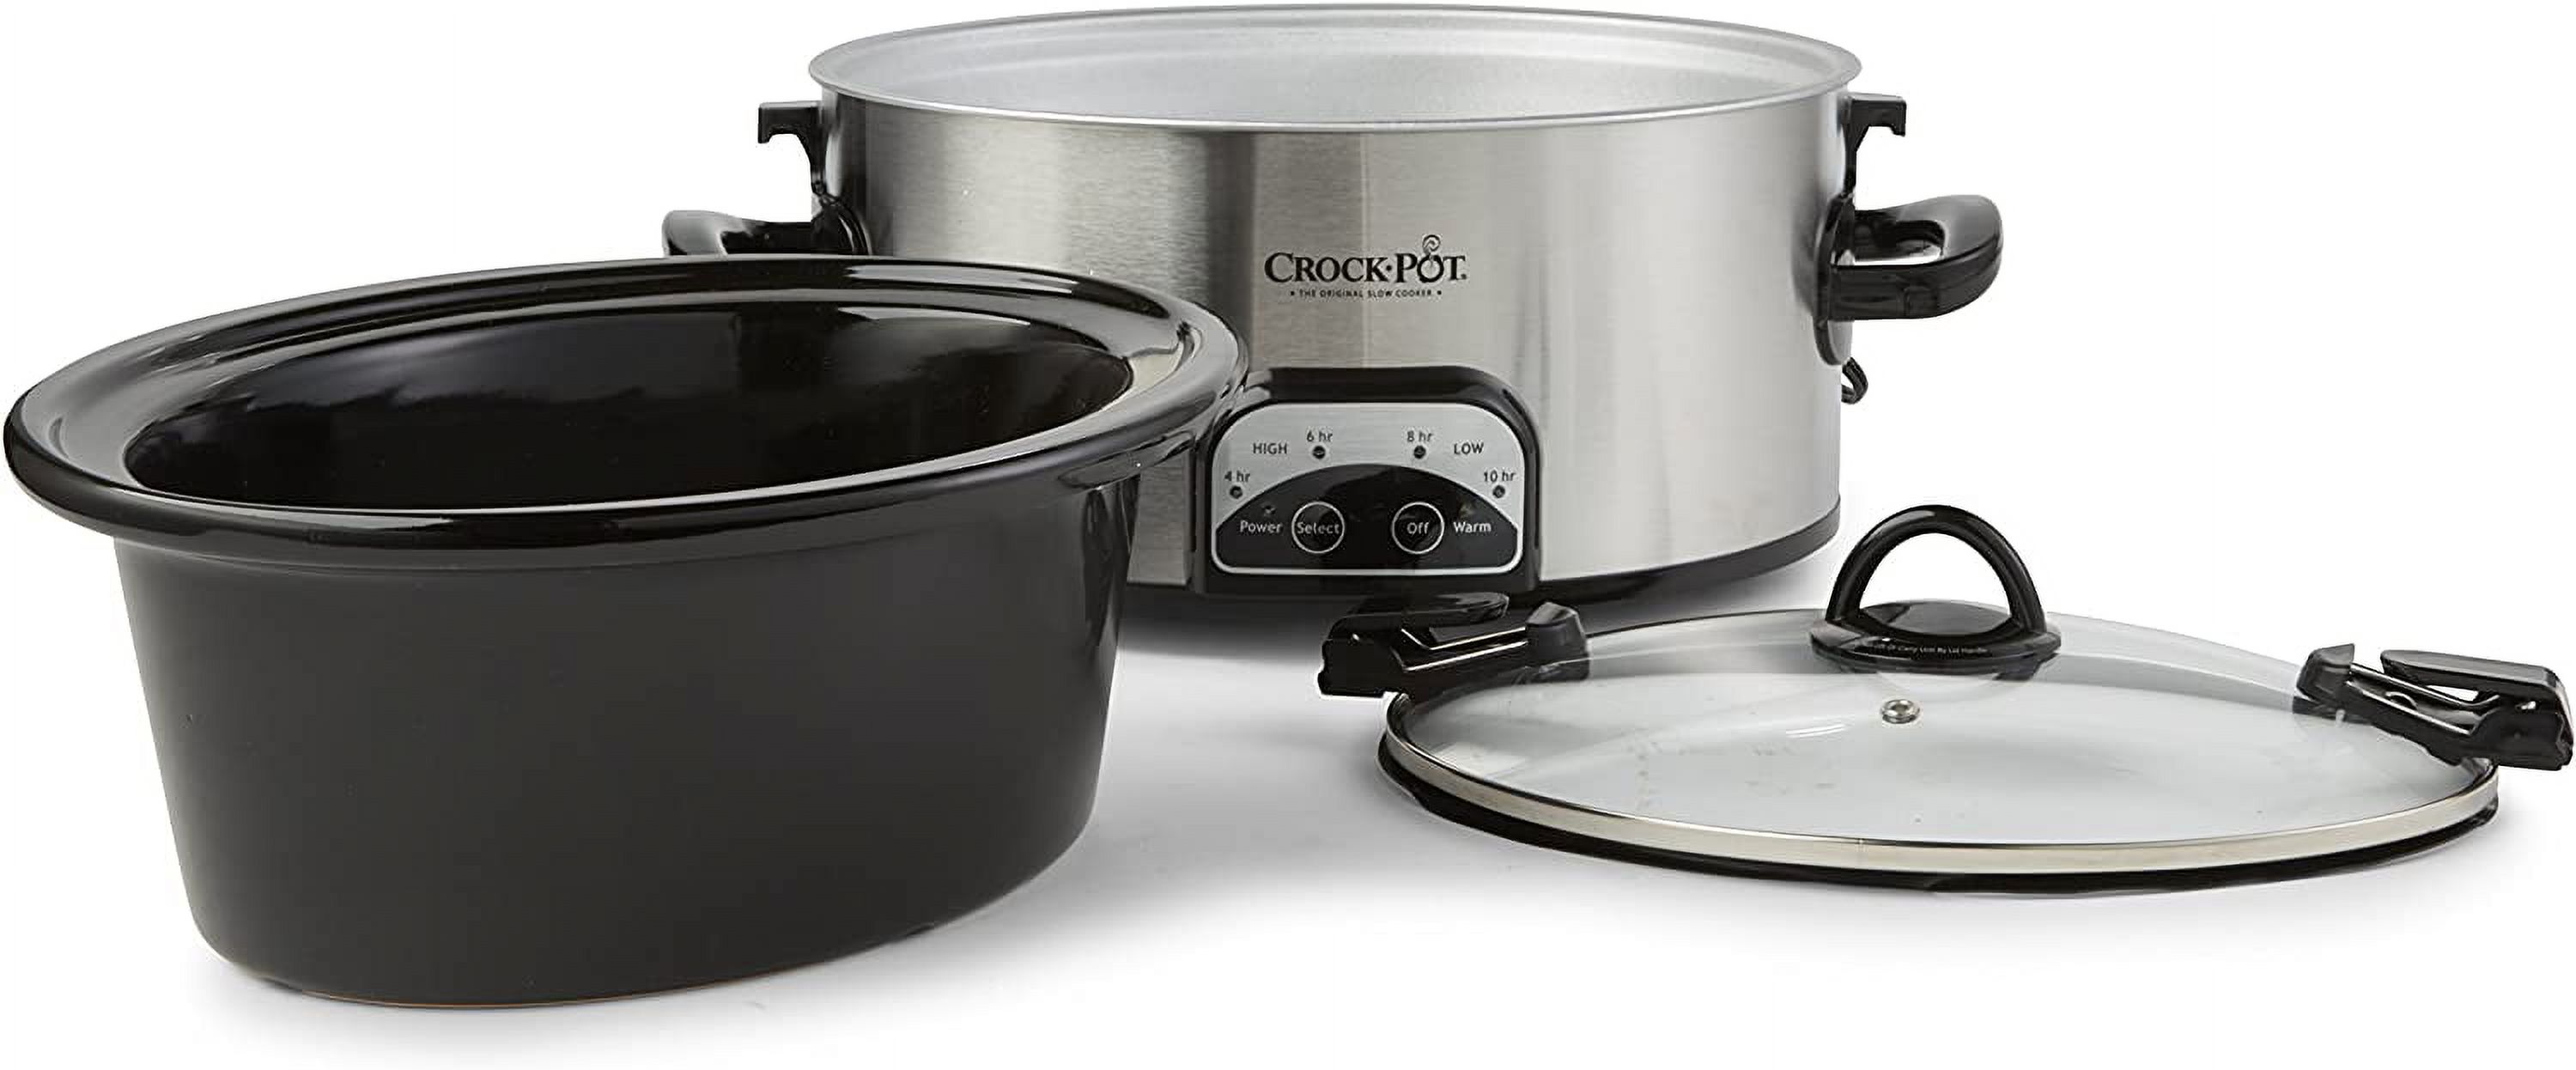 Crock-Pot 6-Quart Programmable Cook & Carry Oval Slow Cooker, Stainless Steel - image 3 of 5